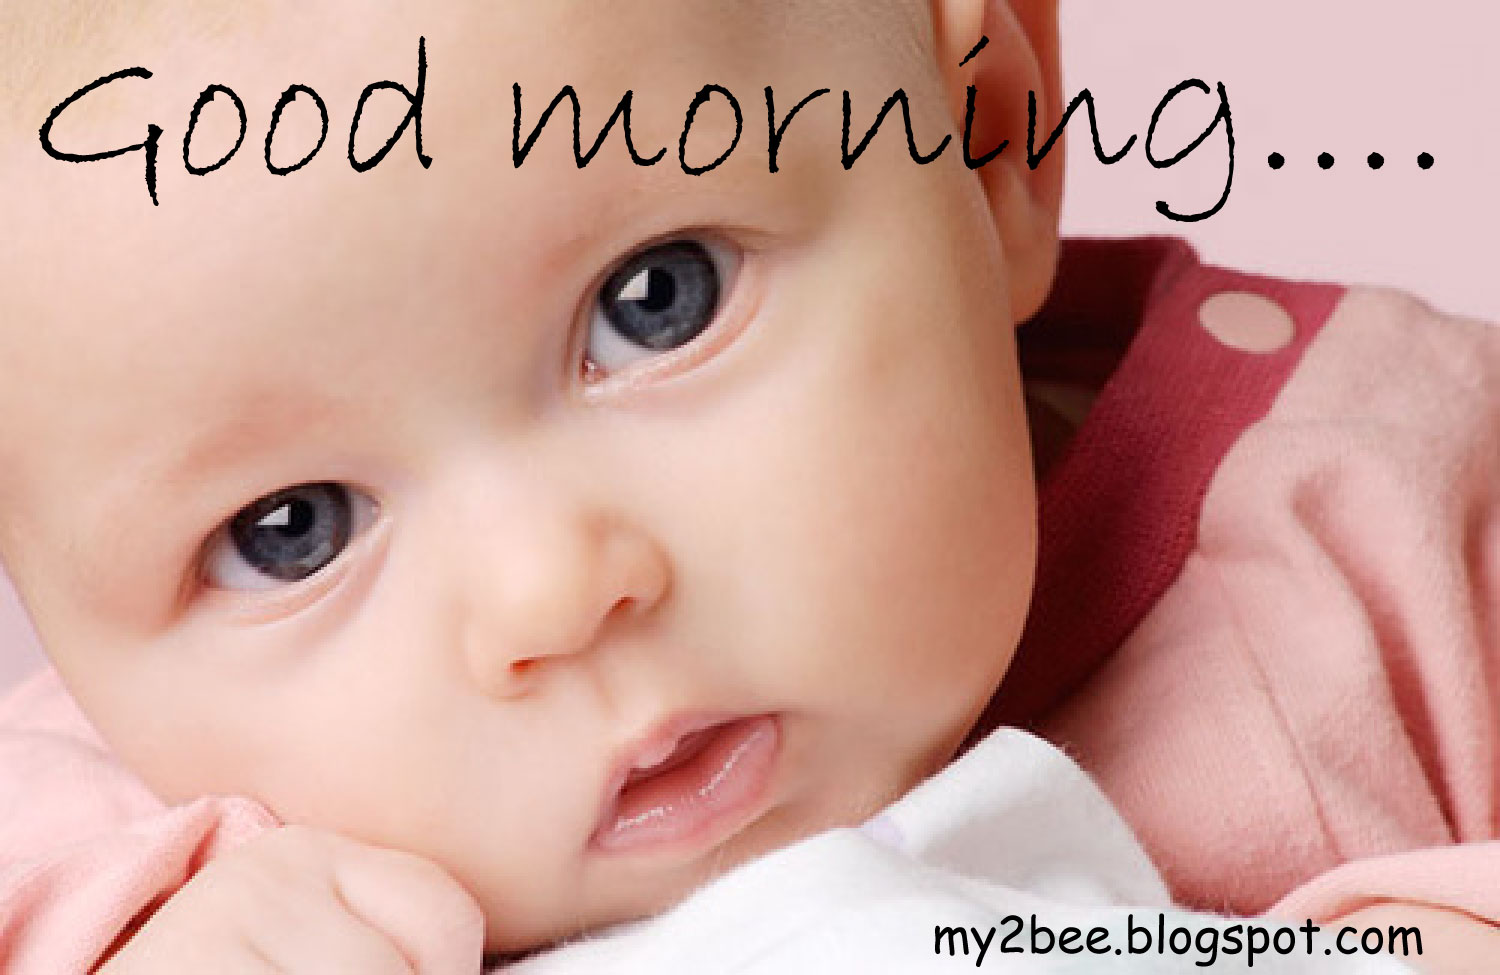 Good Morning Funny Babies Images Good morning cute baby.